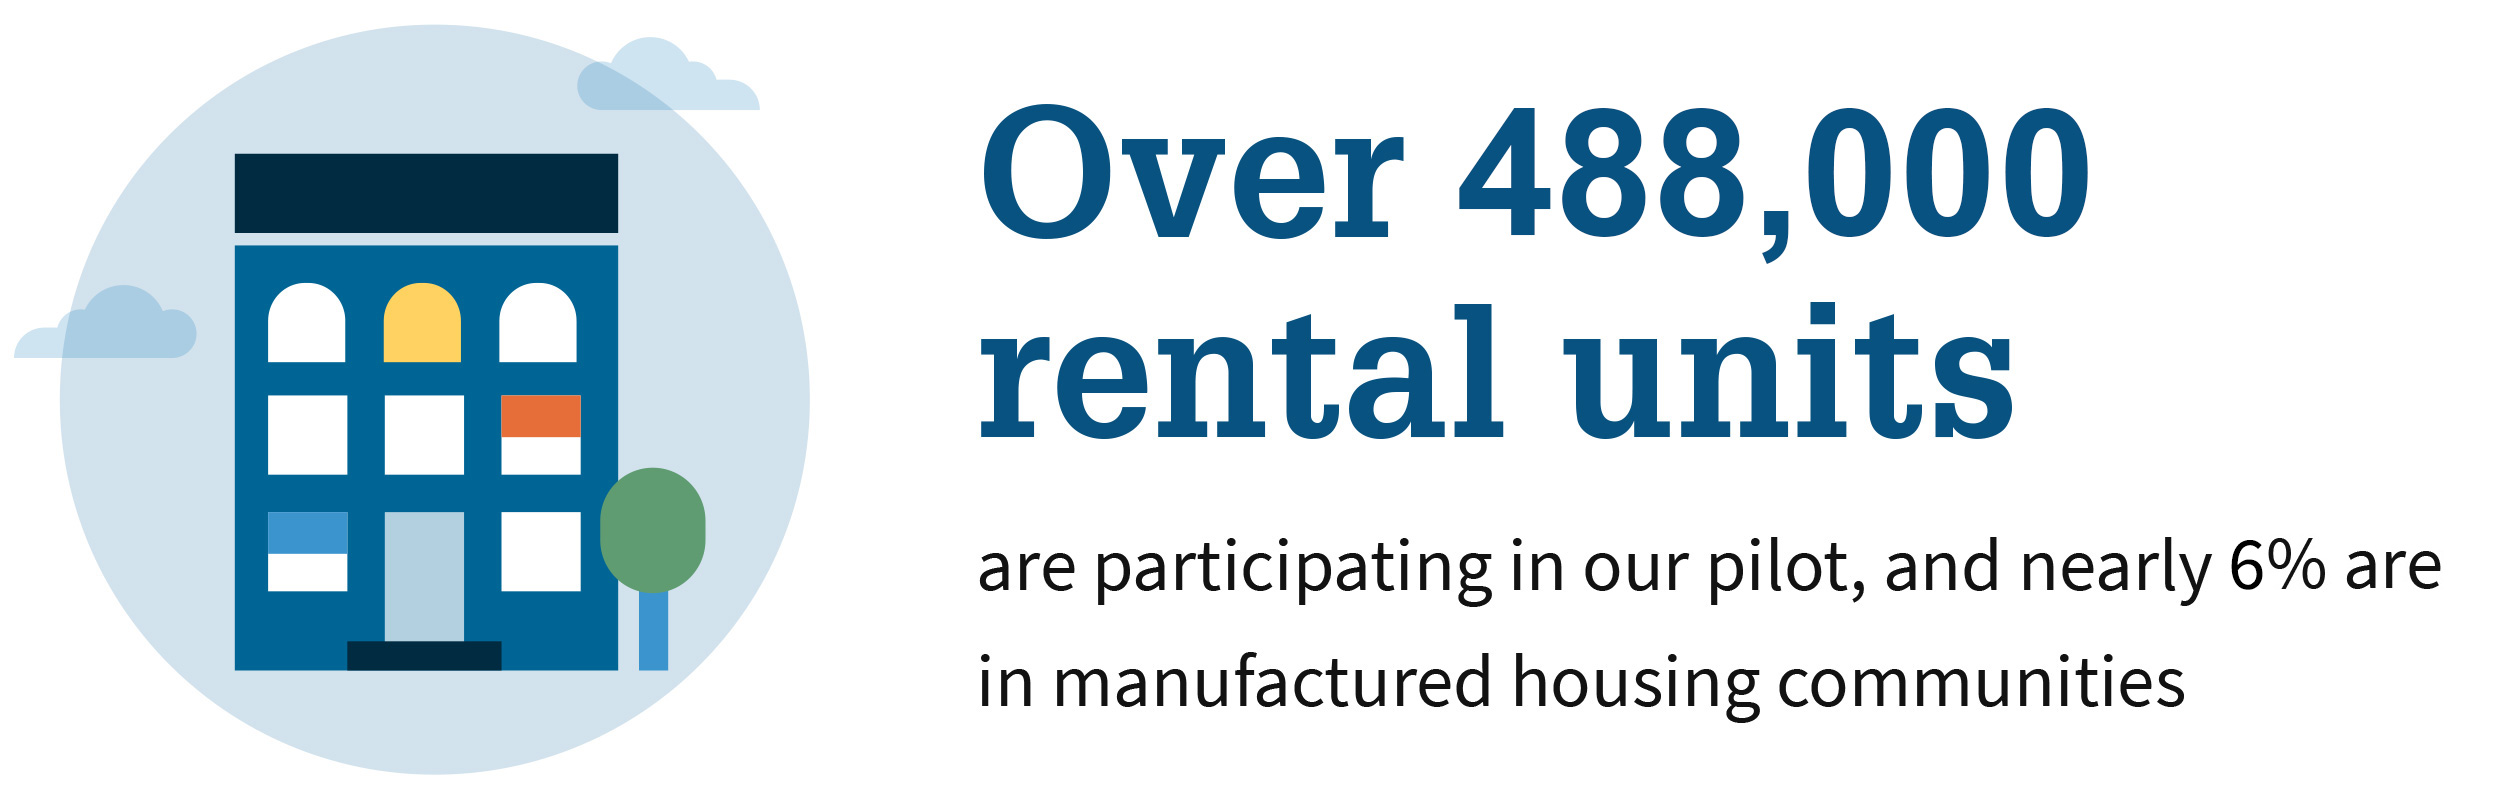 Over 488,000 rental units are participating in our pilot, and nearly 6% are in manufactured housing communities